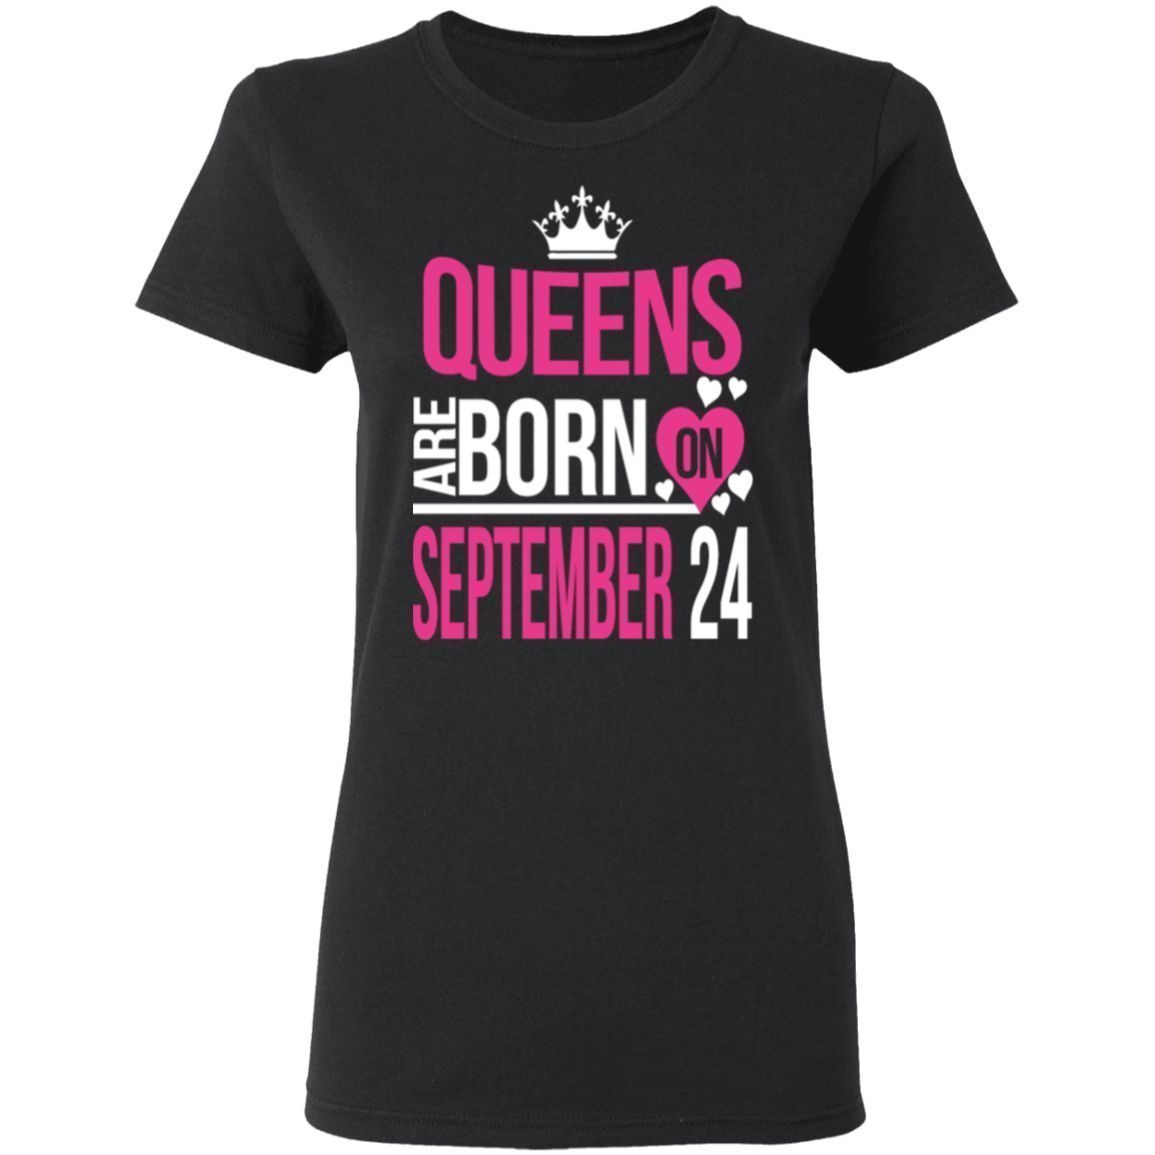 Queens Are Born on September 24 T-Shirt